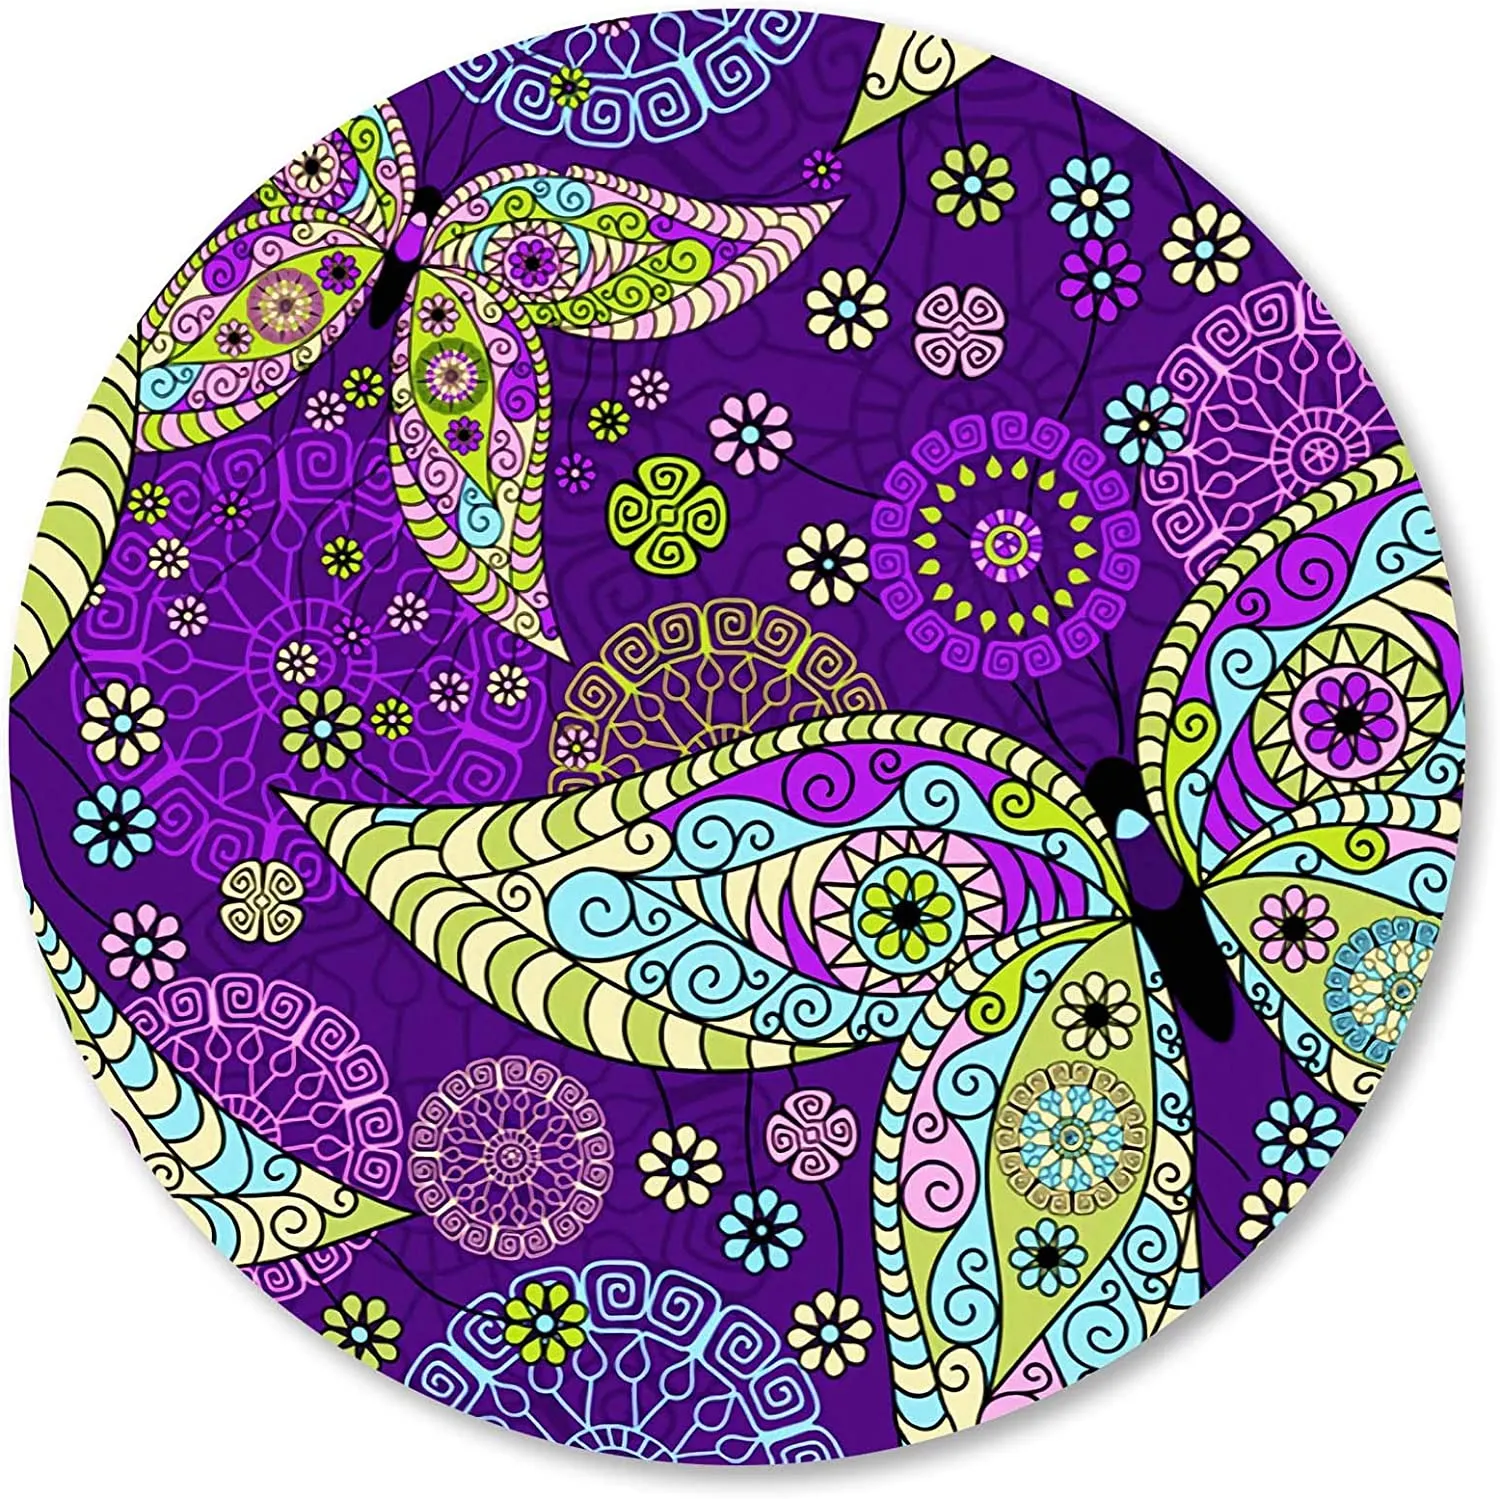 Purple Butterfly Mandala Round Mouse Pad Vintage Flower Pattern Round Small Mouse Pads Non-Slip Rubber Base Mouse Pad for Laptop